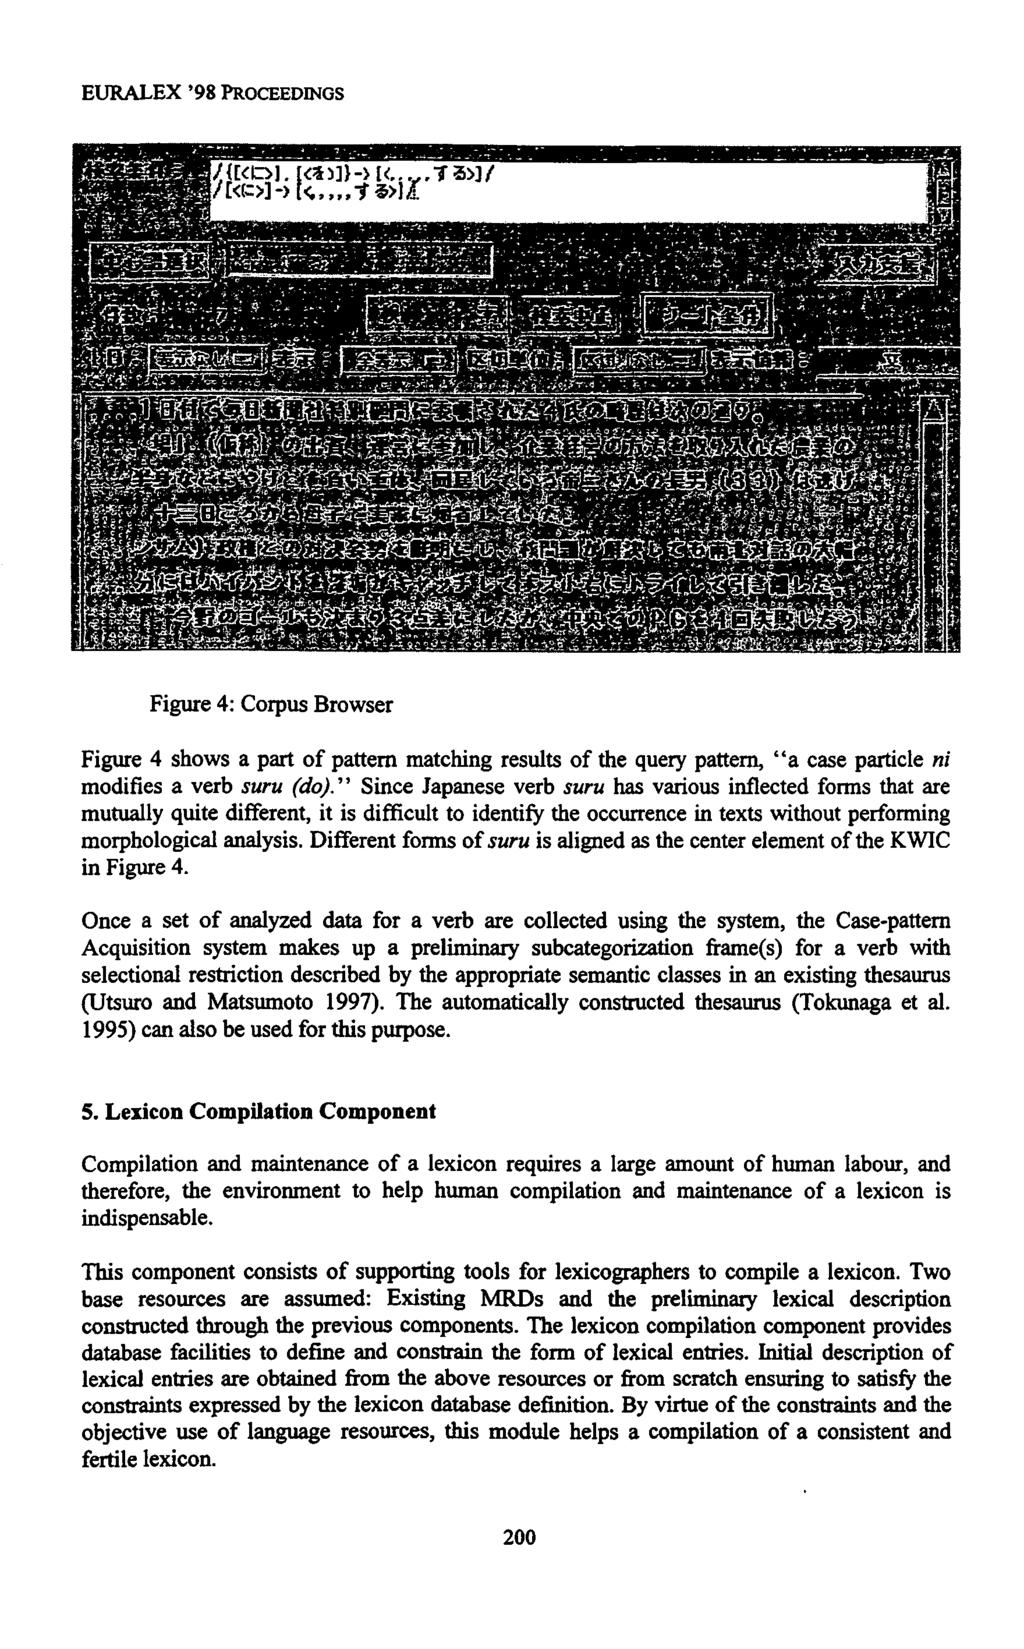 EURALEX '98 PROCEEDINGS Figure 4: Corpus Browser Figure 4 shows a part of pattern matching results of the query pattern, "a case particle ni modifies a verb suru (do).